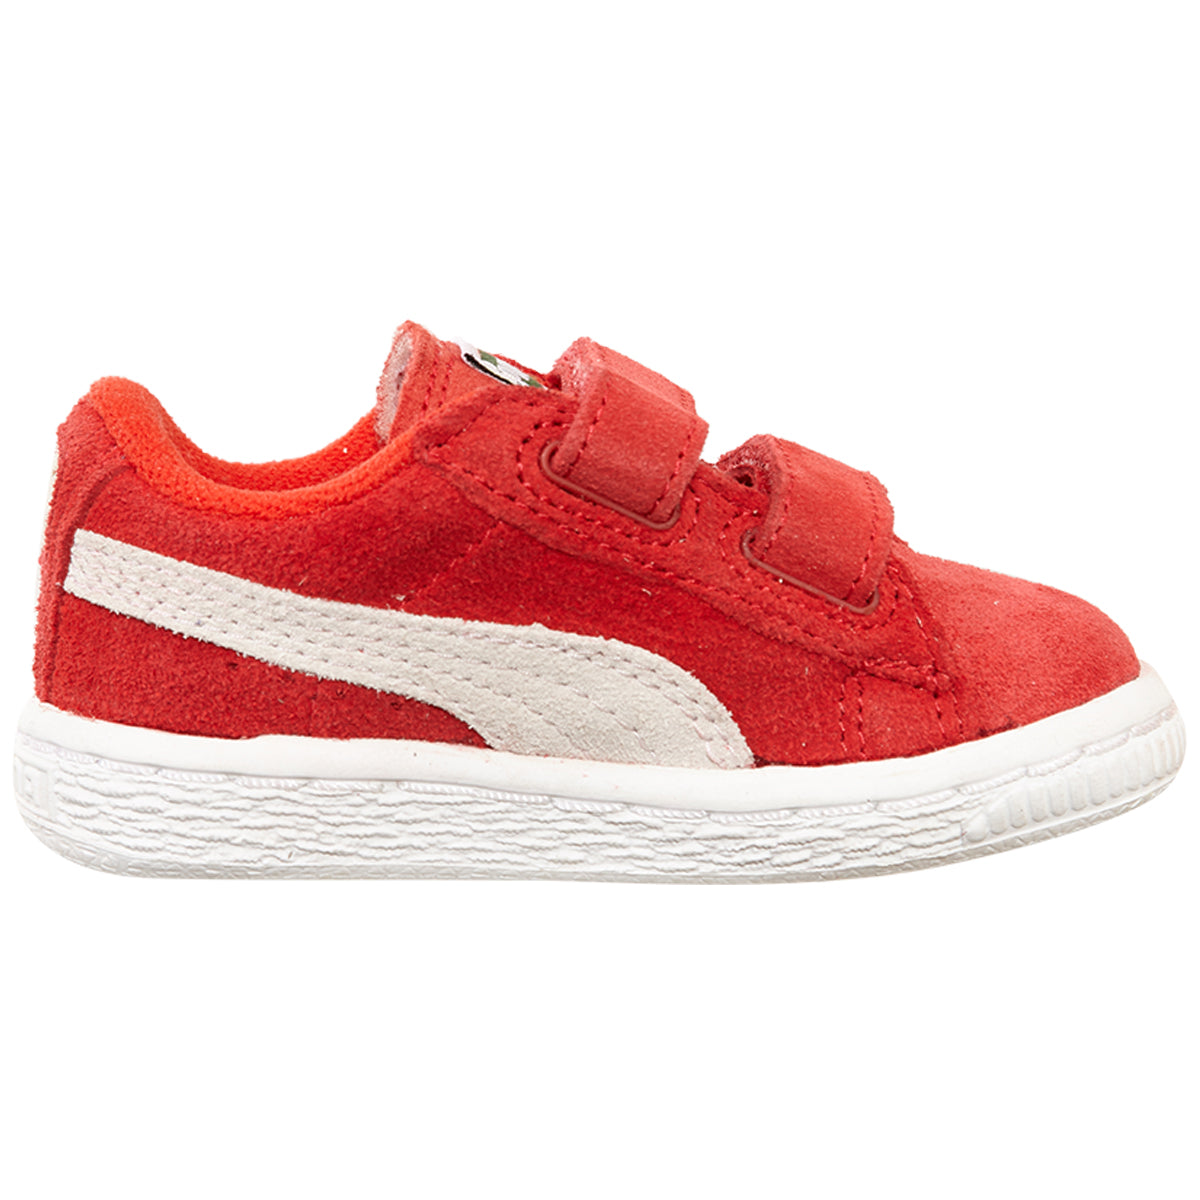 Puma Suede 2 Straps Toddlers Style : 356274